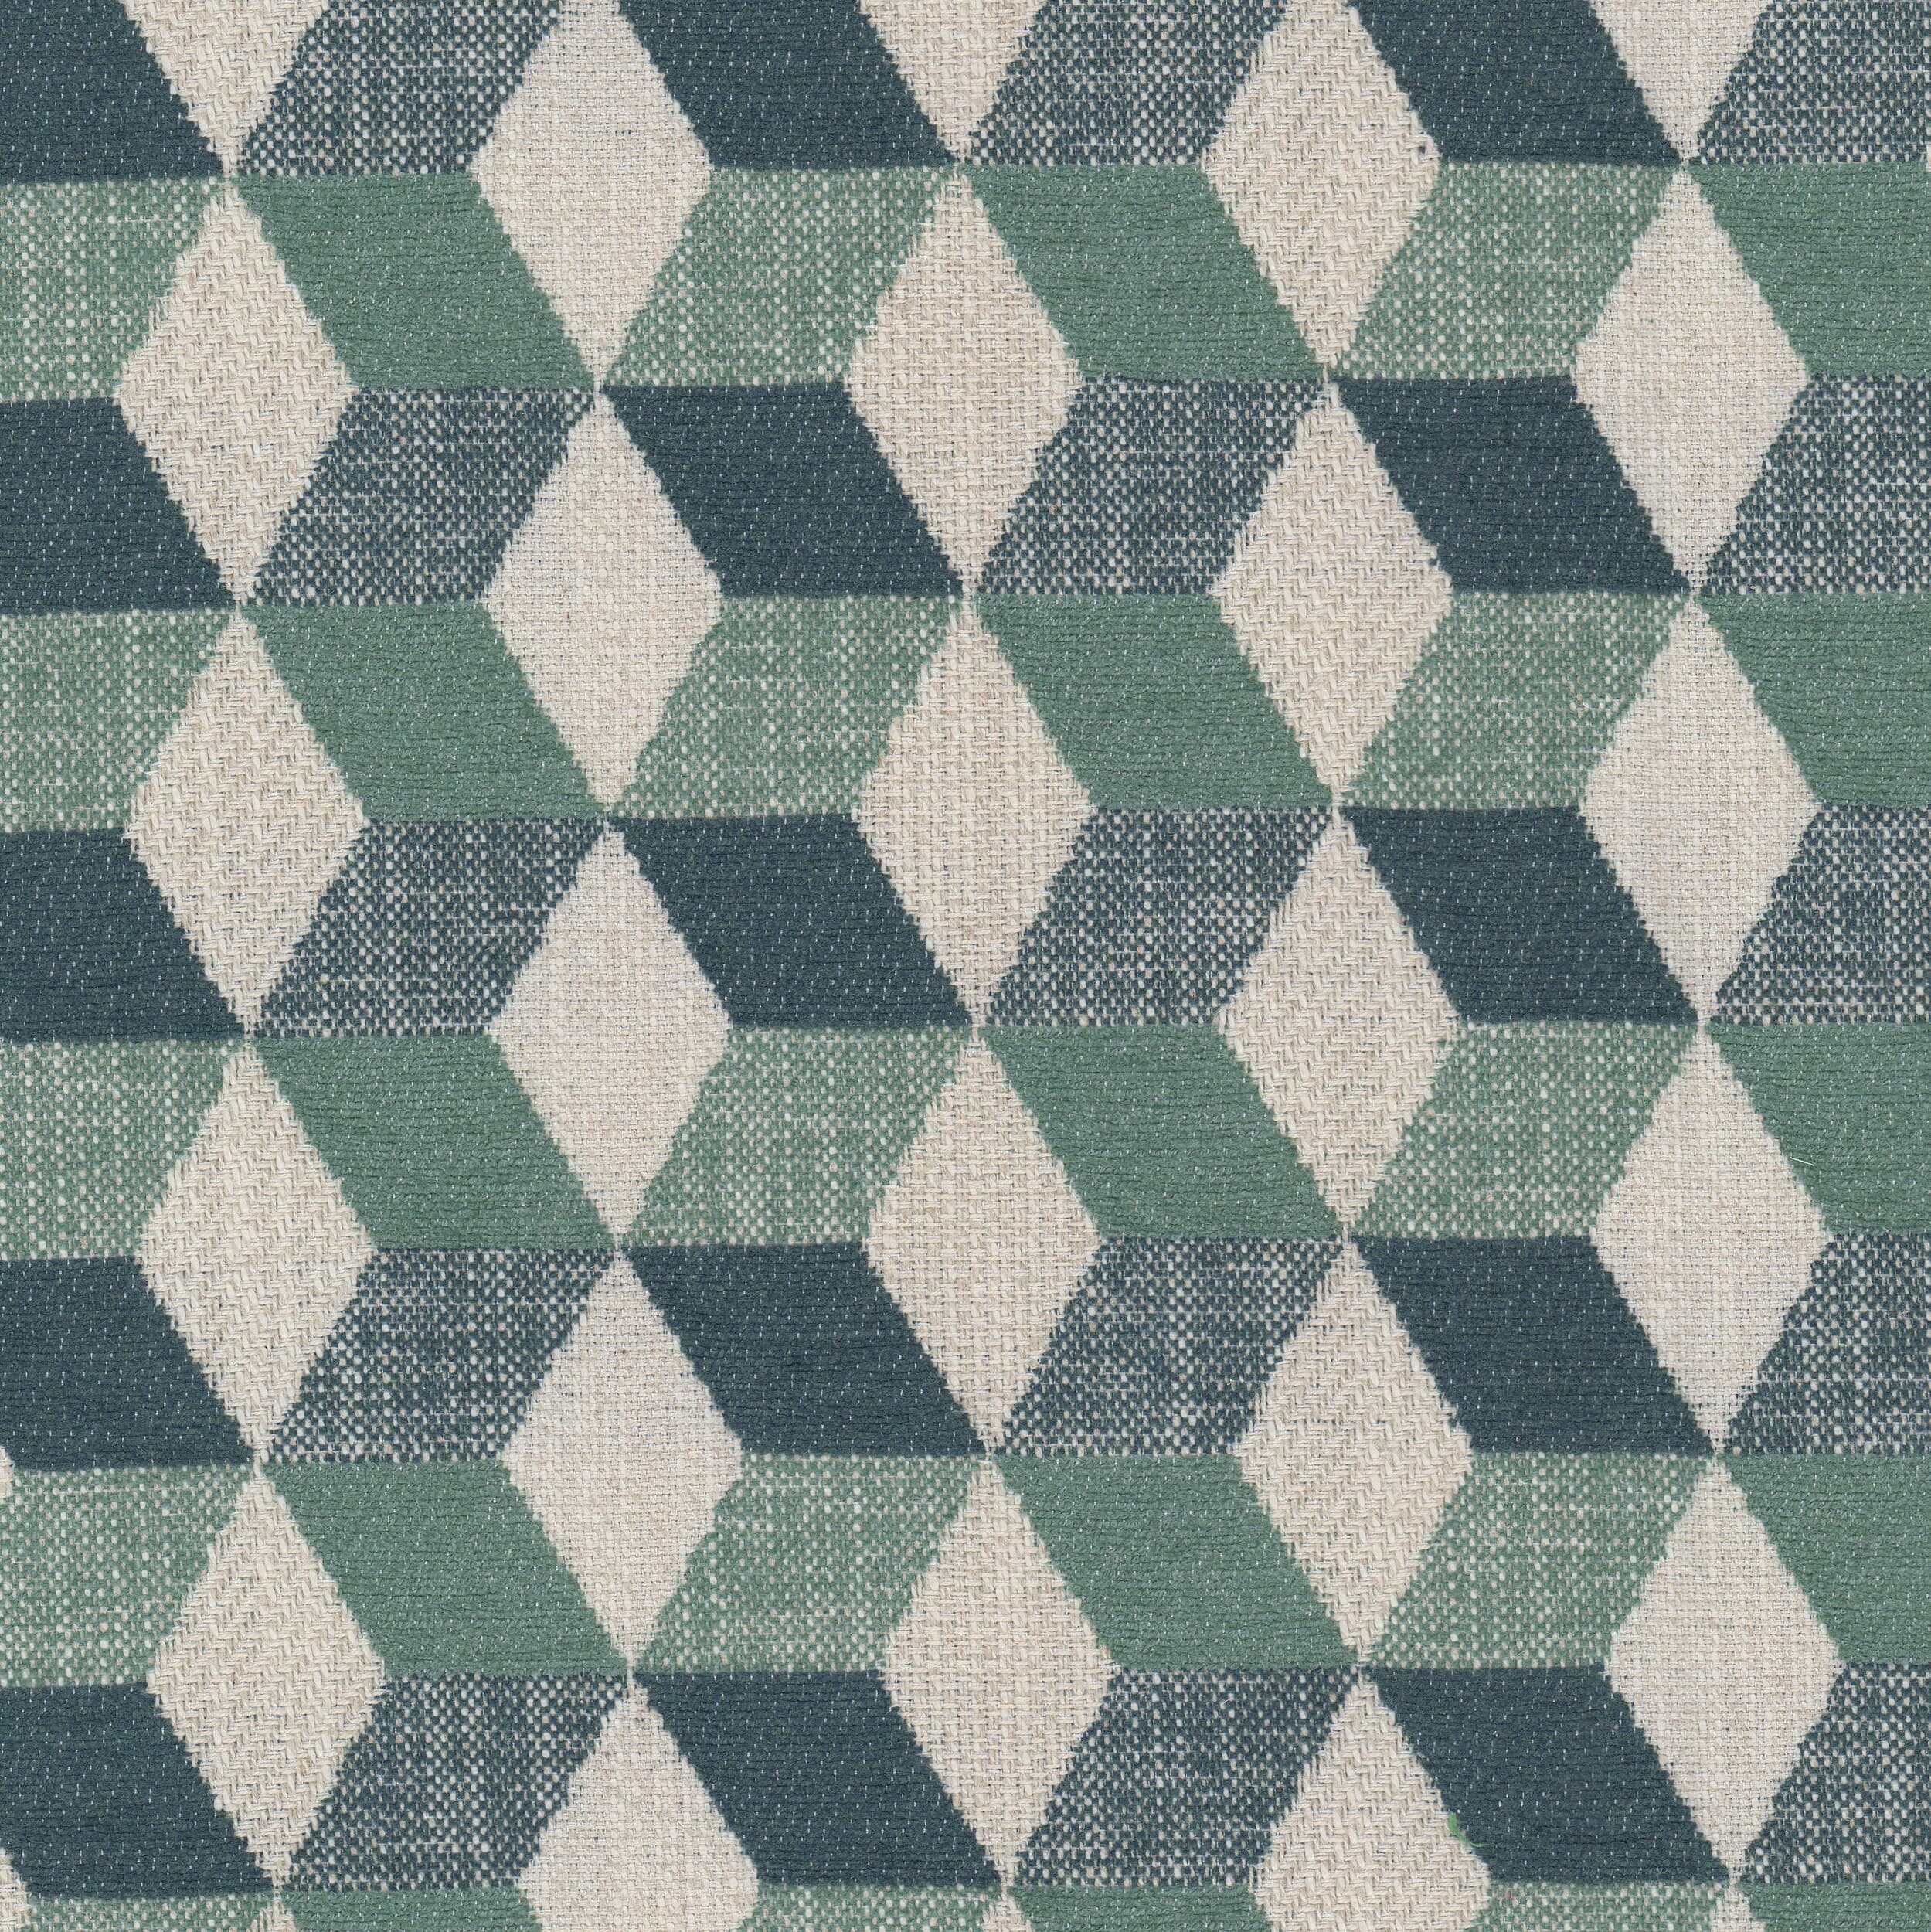 Candlewood 2 Teal by Stout Fabric